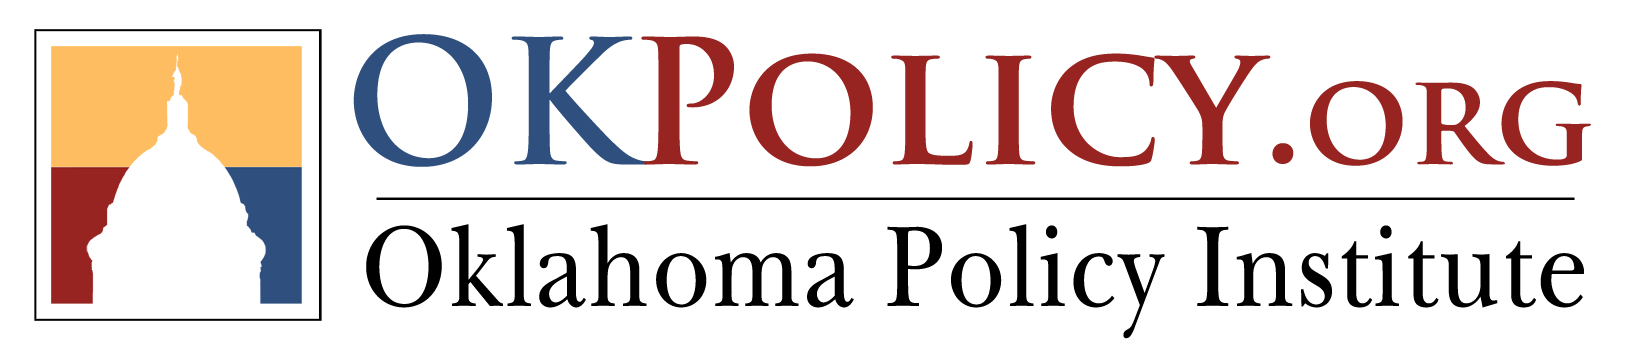 OKPolicy-logo-WEB-resolution-1.png